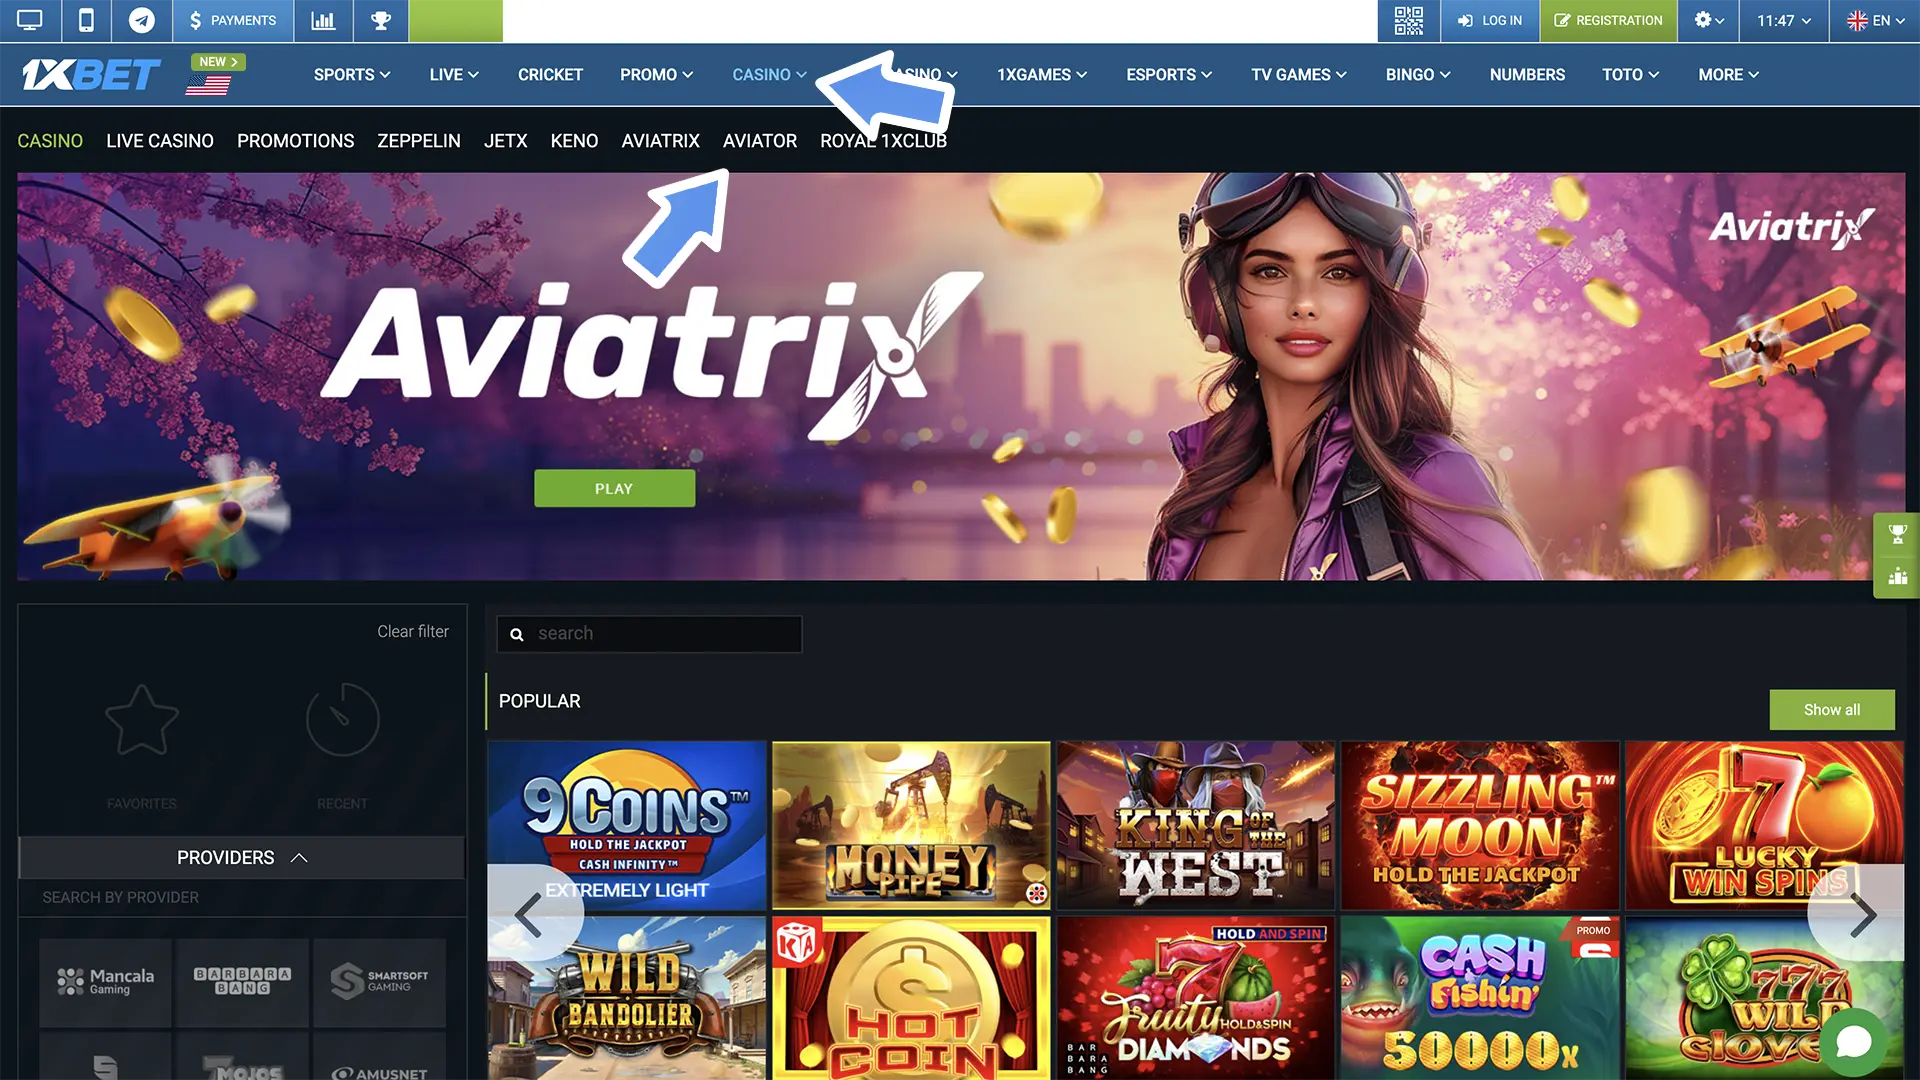 Launch the casino tab on the official 1xBet casino site to find your favourite Aviator game.